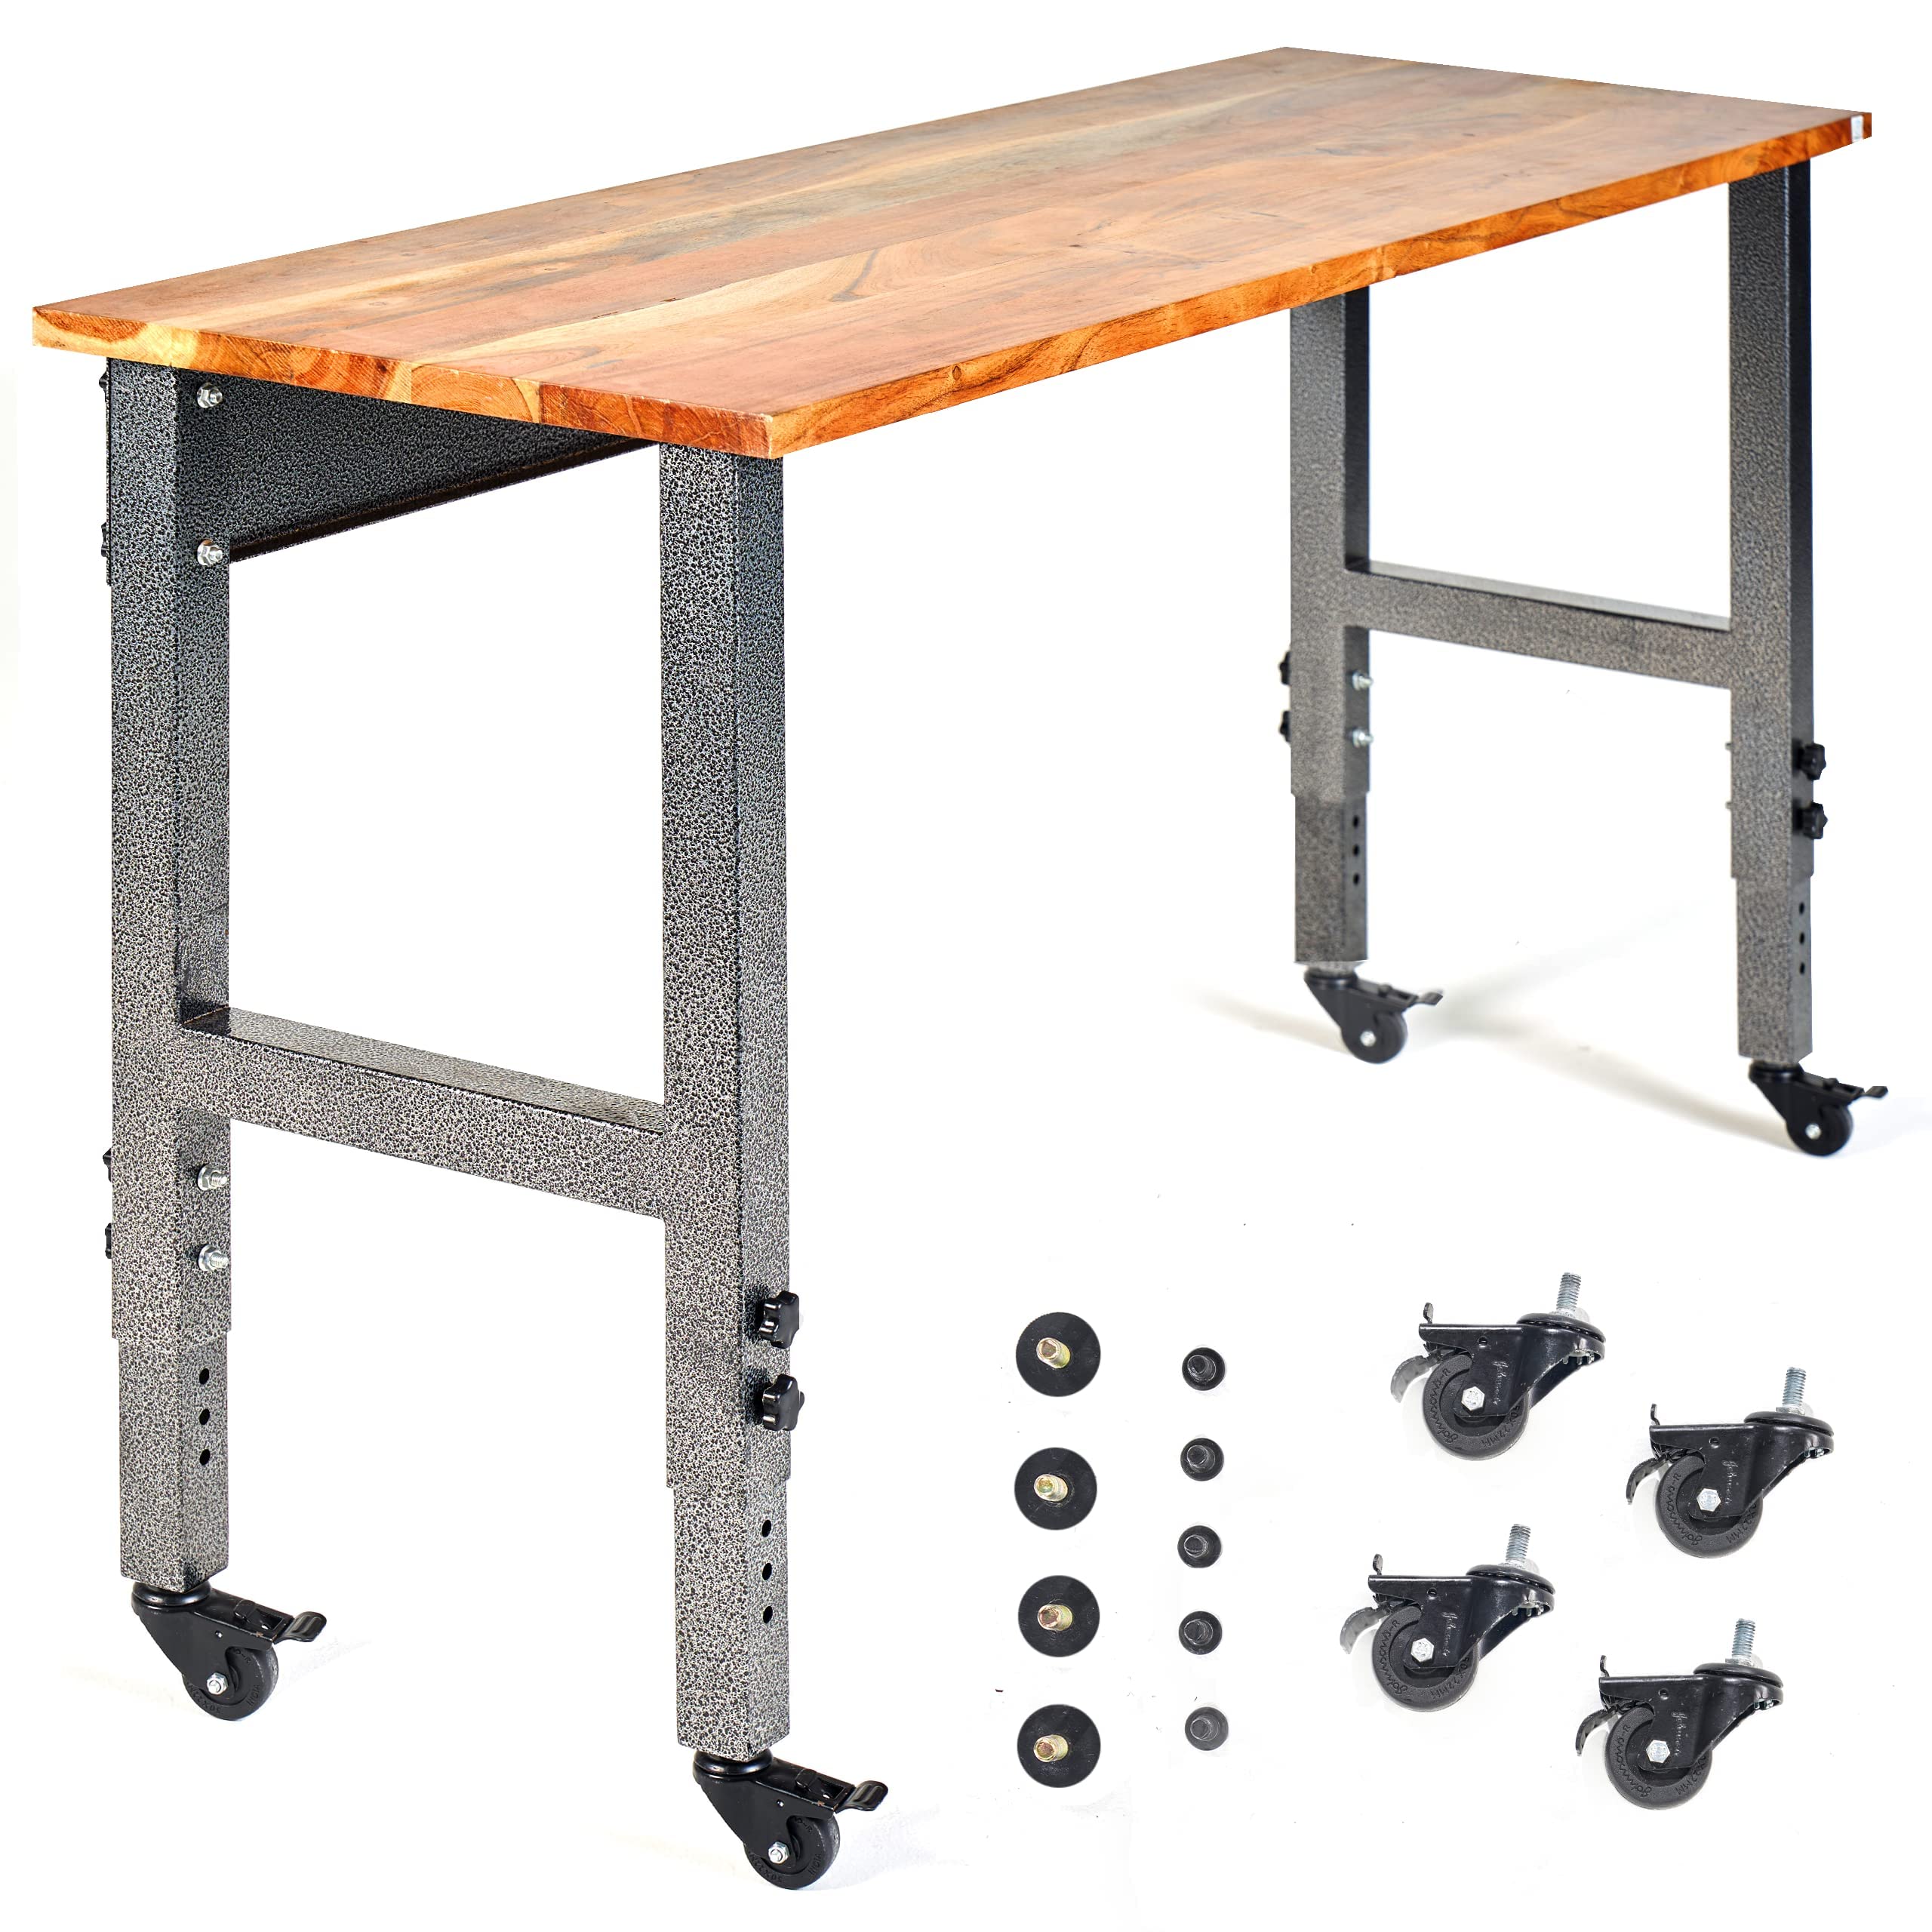 Prime Members: Fedmax Rolling Workbench w/ Acacia Wood Top + Adjustable Legs: 48" for $100, 61" for $116 + Free Shipping